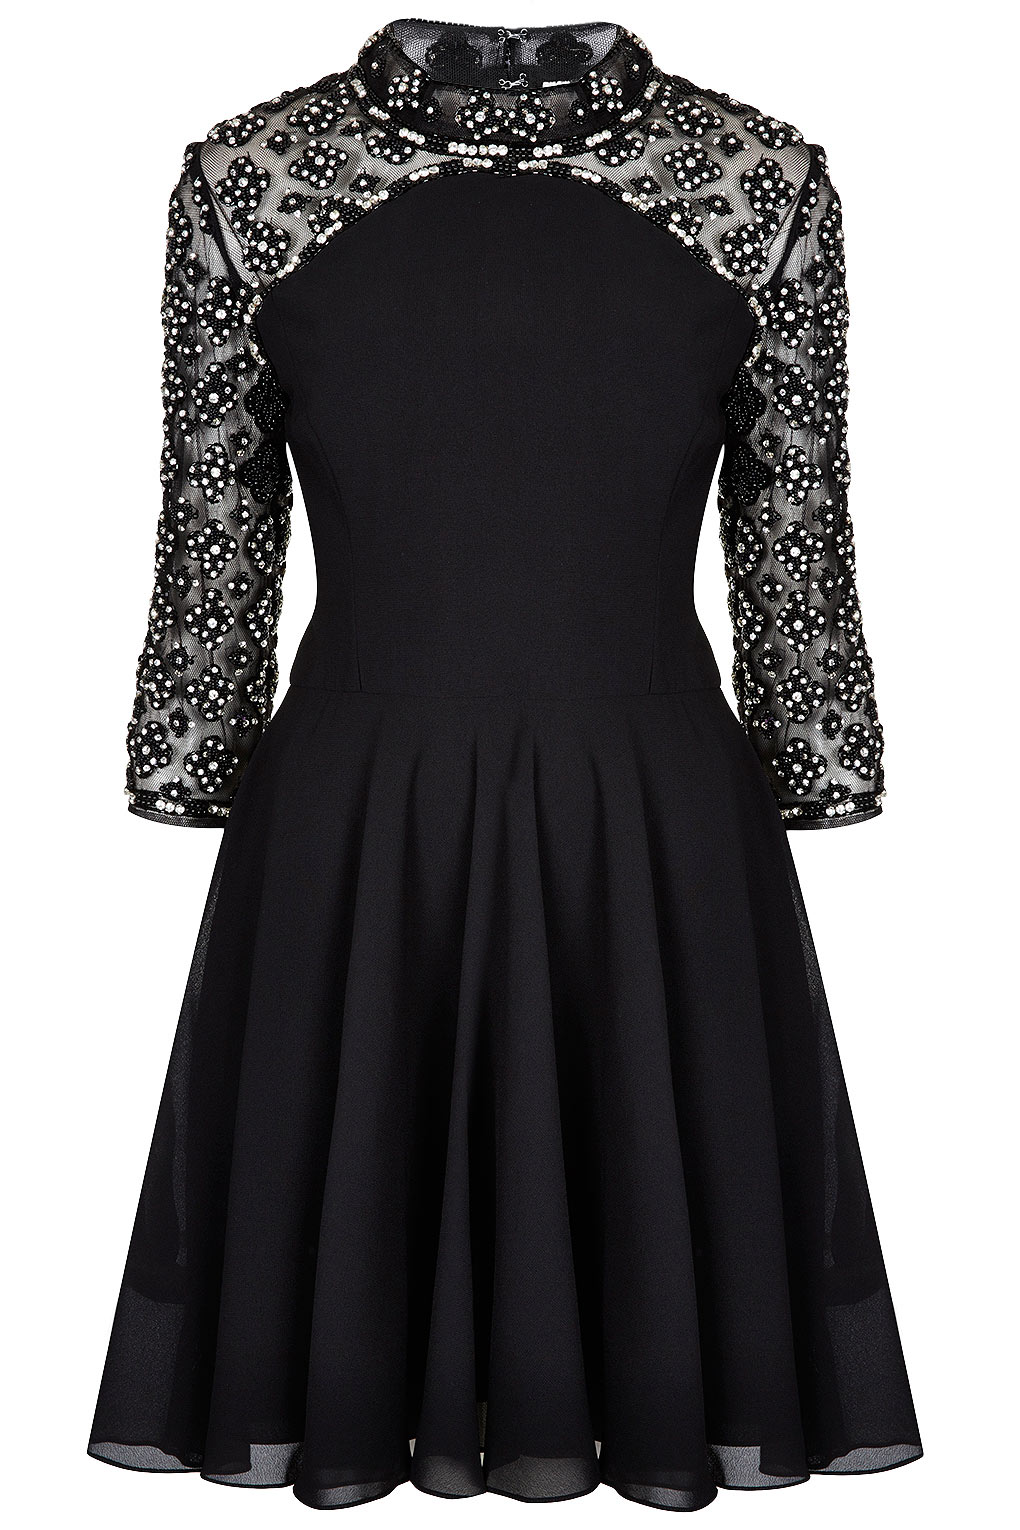 Lyst - Topshop Limited Edition Pearl Swing Dress in Black